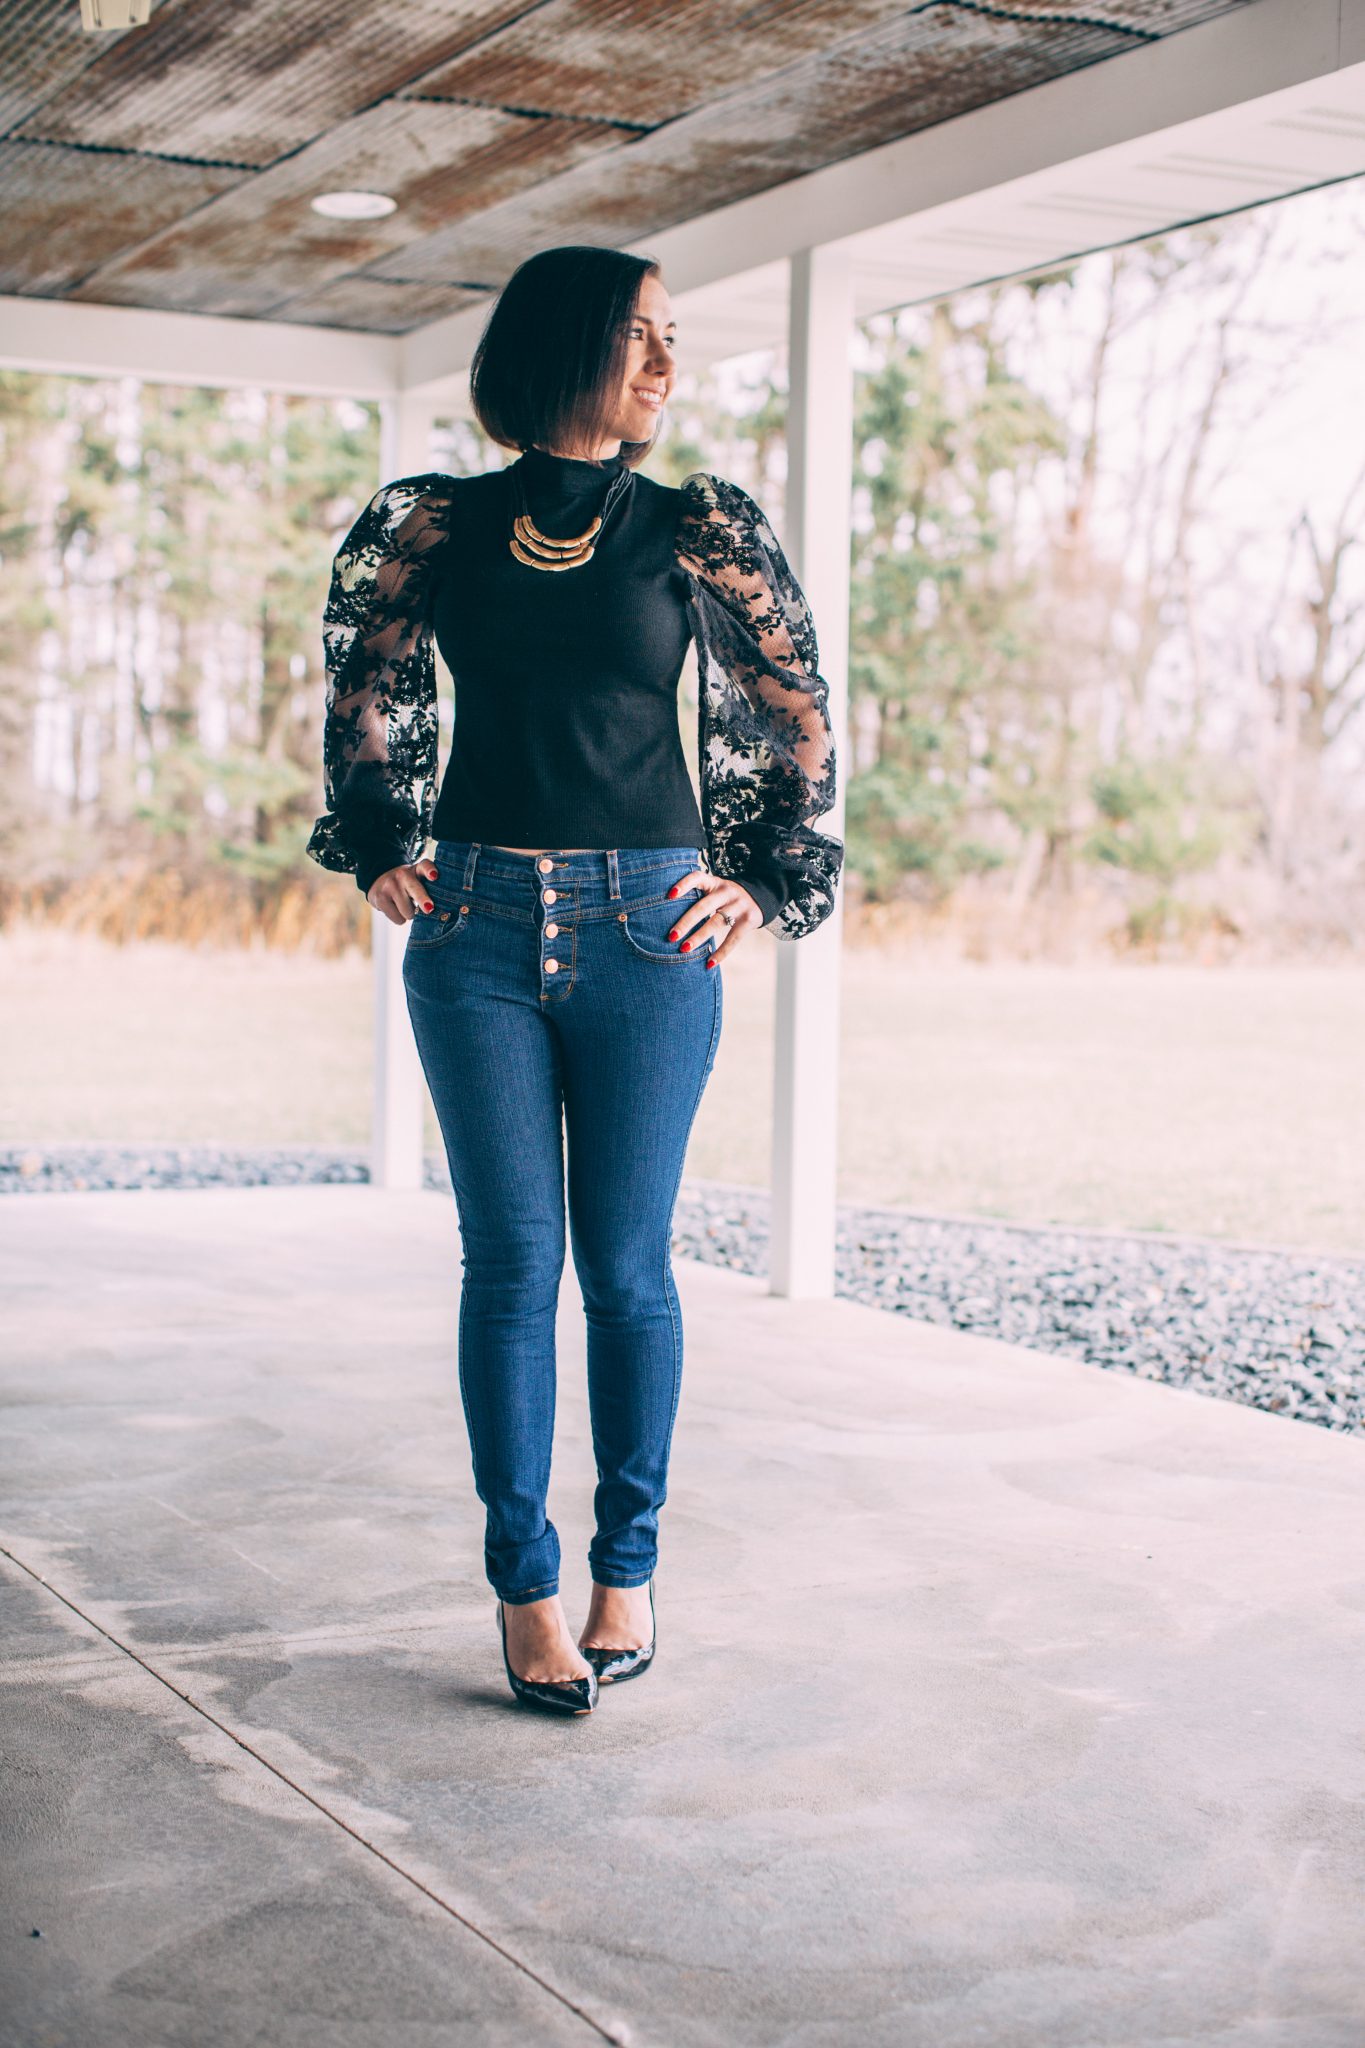 Black Floral Puff Sleeve Top - Trying the Puff Sleeve Trend